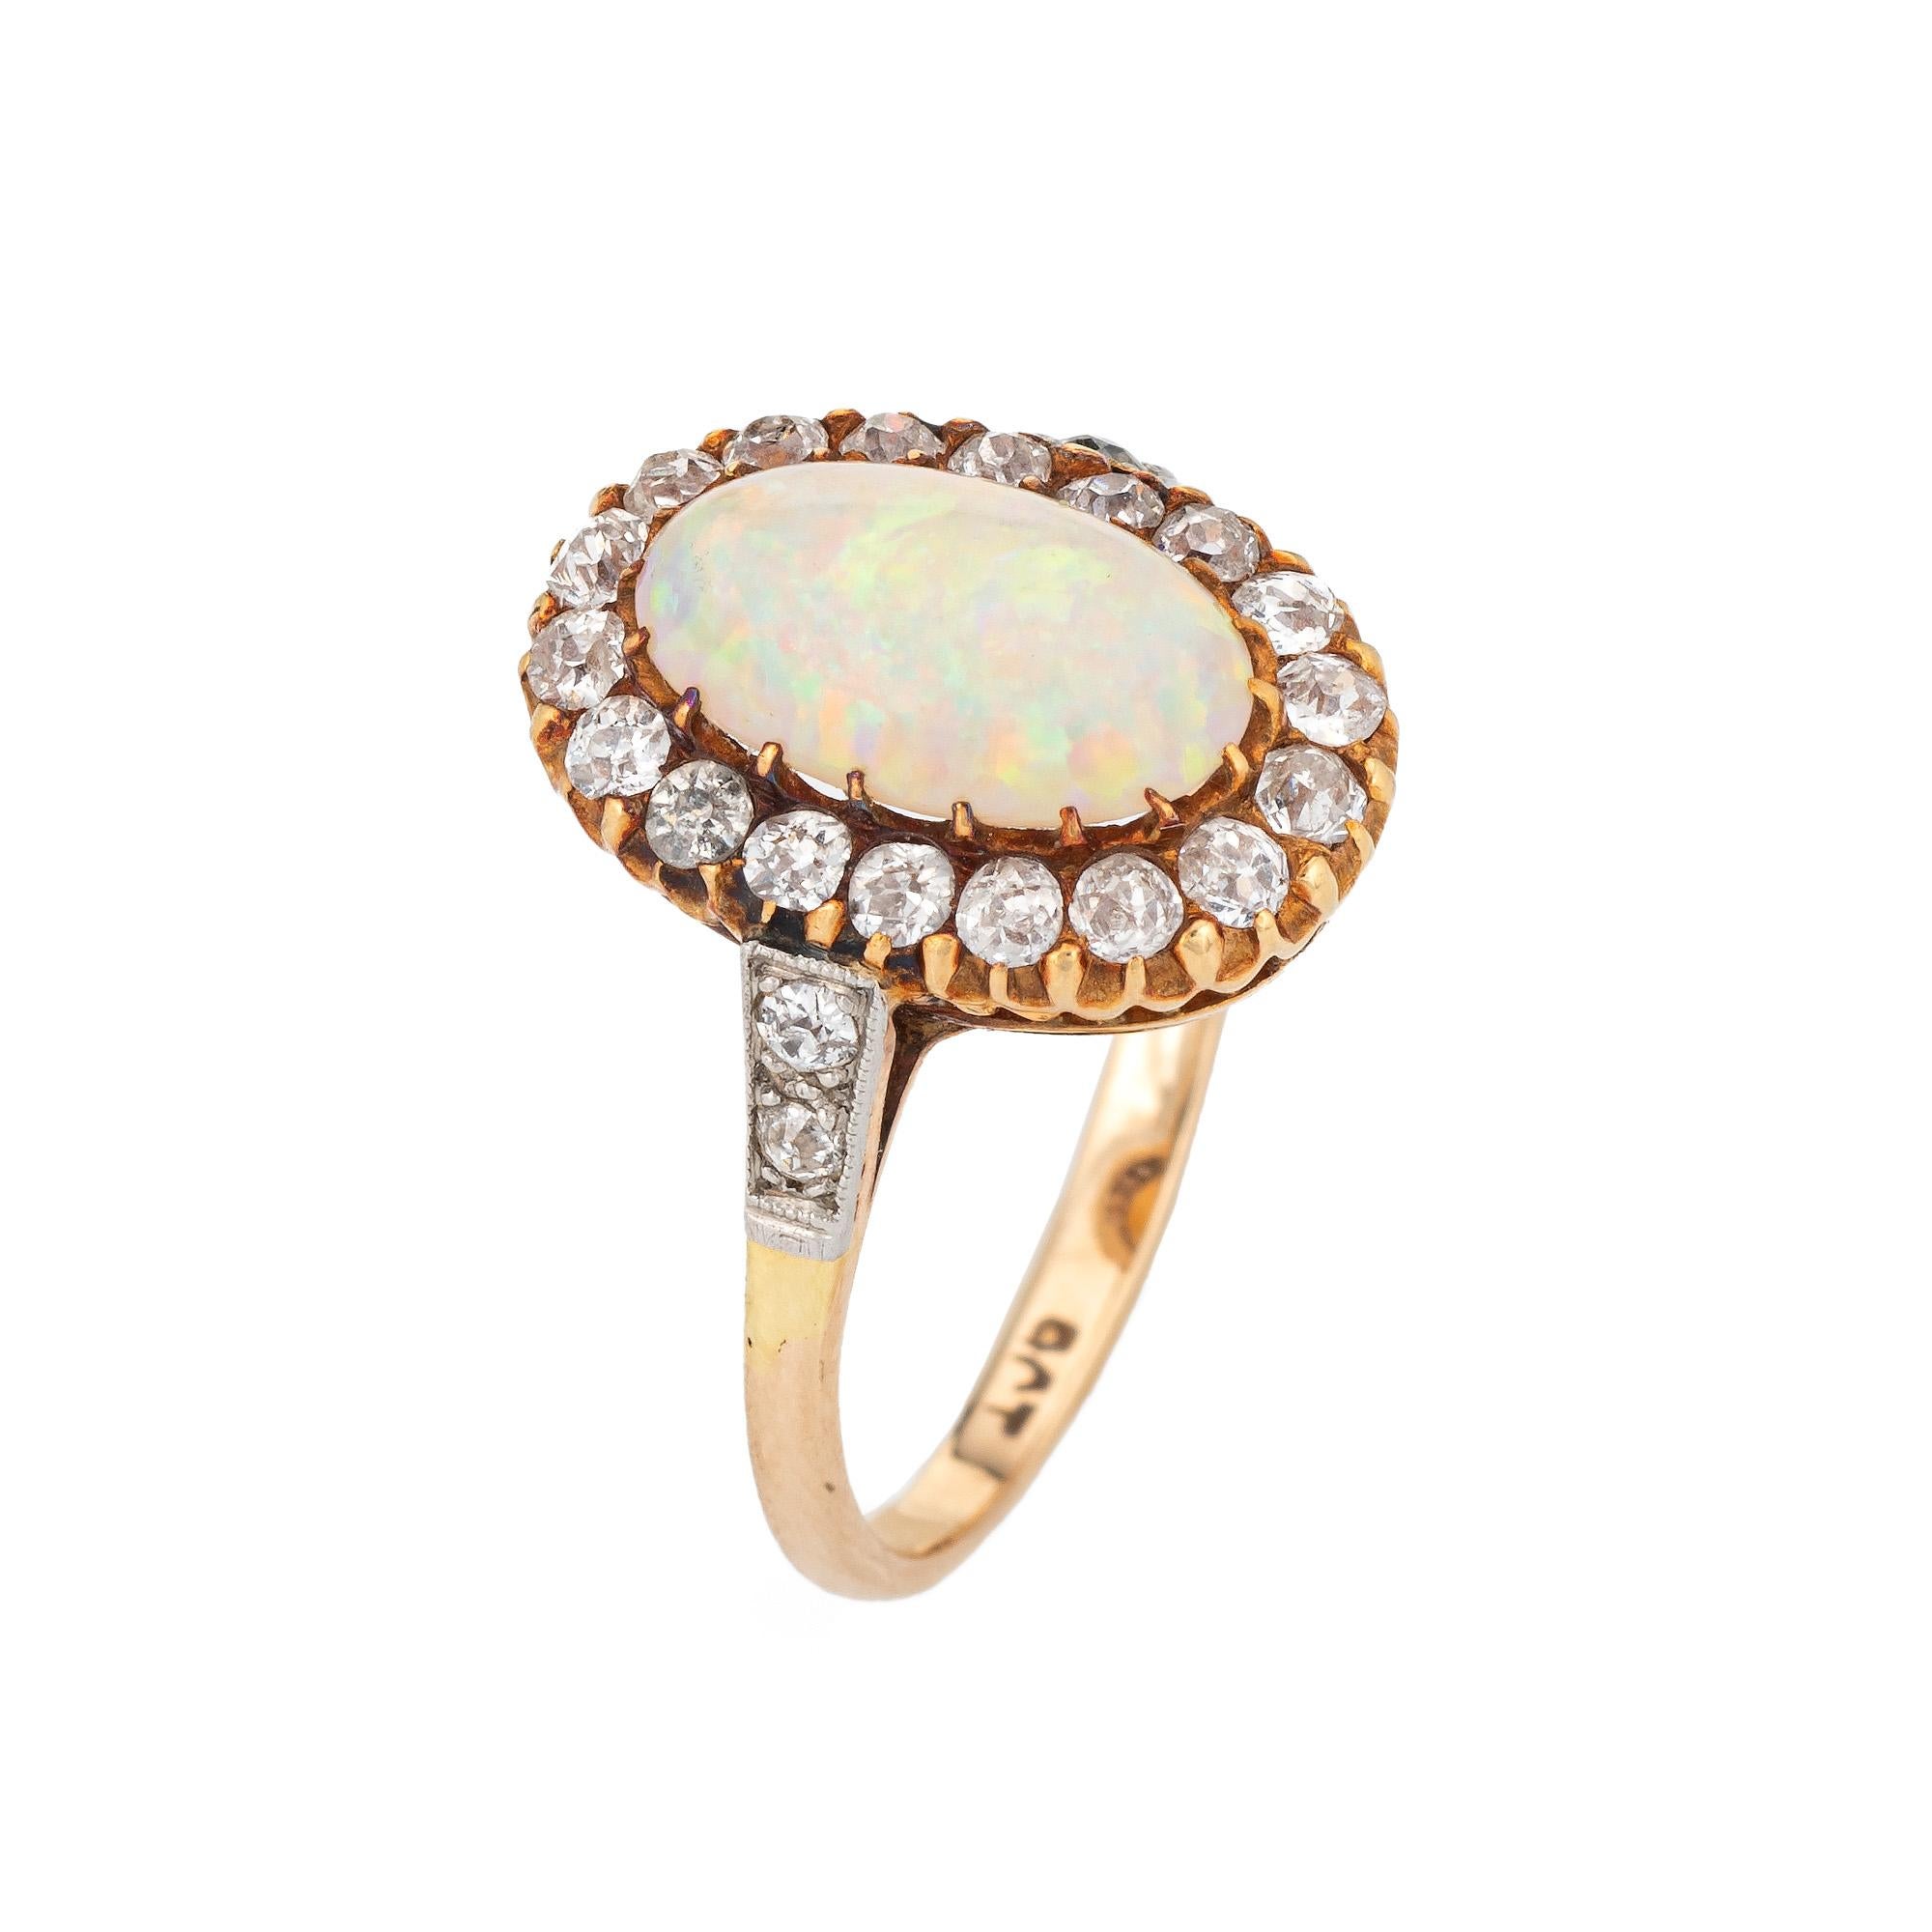 Elegant antique Victorian opal & diamond ring (circa 1880s to 1900s) crafted in 9 karat yellow gold. 

Natural opal measures 11mm x 7mm (estimated at 1.50 carats). 22 old mine cut diamonds total an estimated 1 carat (estimated at J-K color and